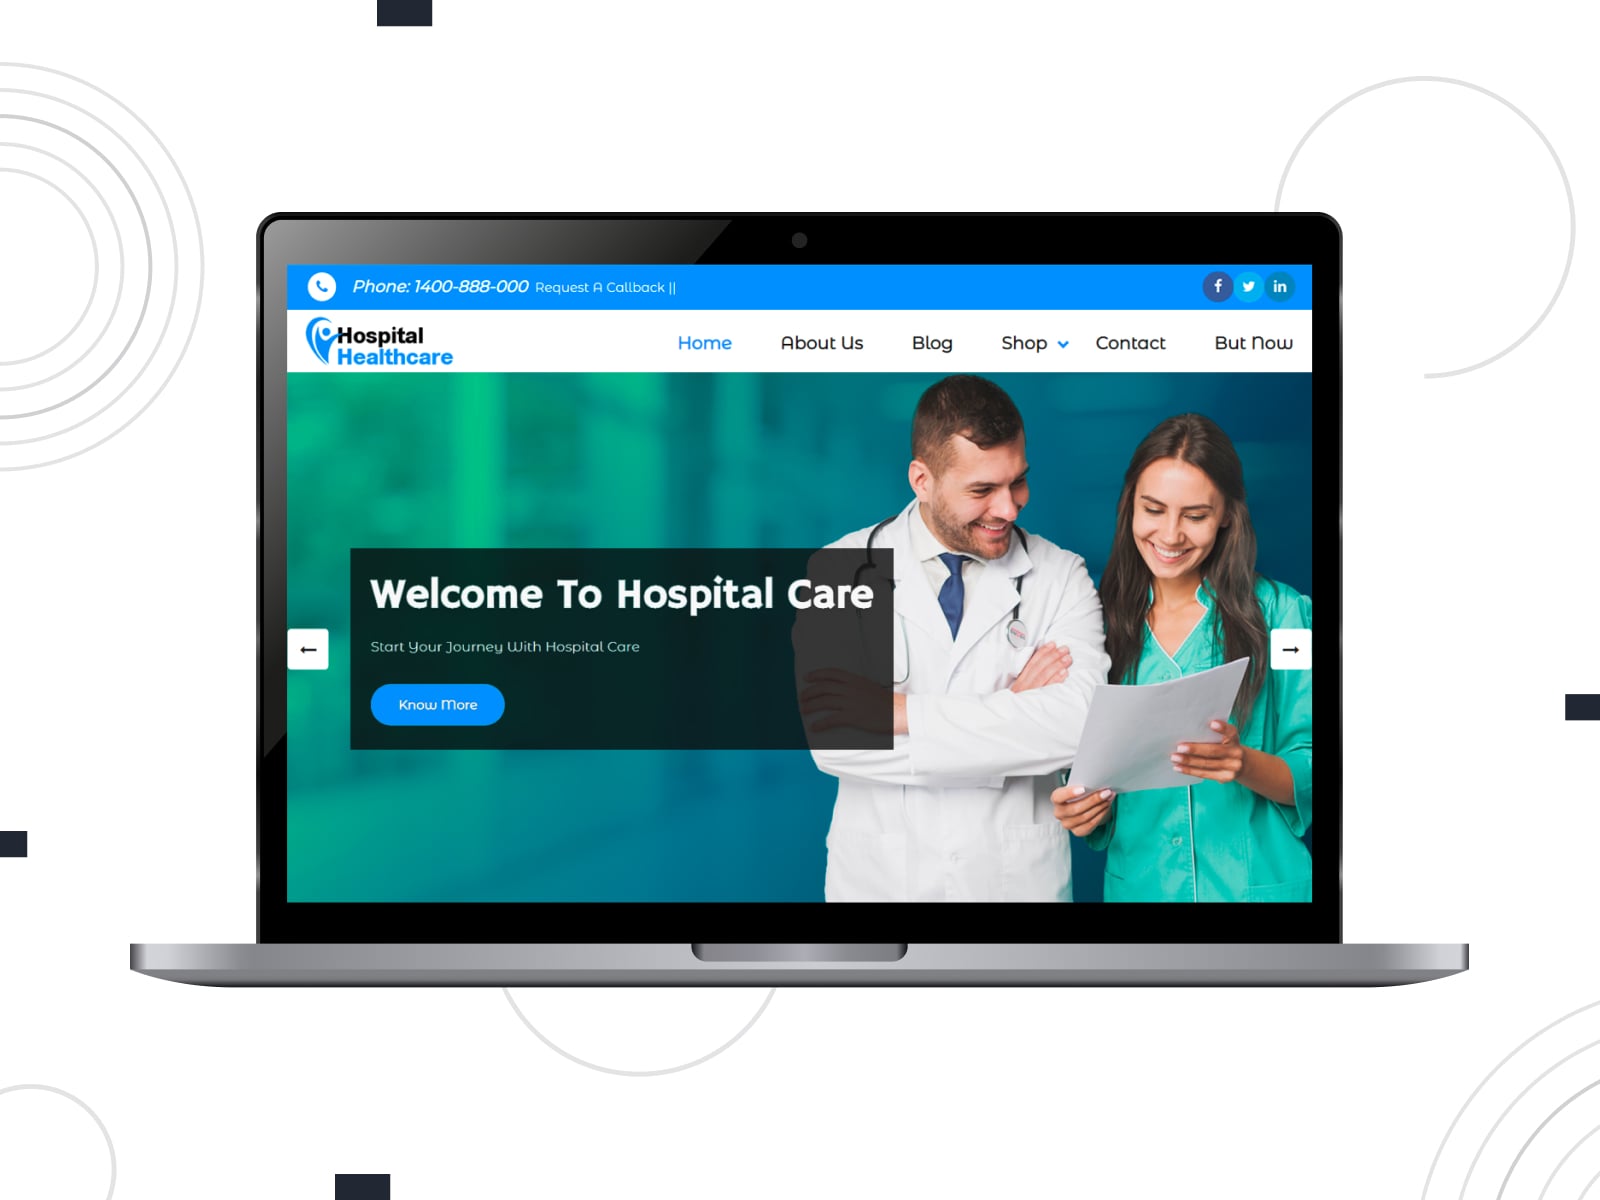 Collage of the Hospital Health Care pharmacy WordPress theme demo page in blue, green and white colors.